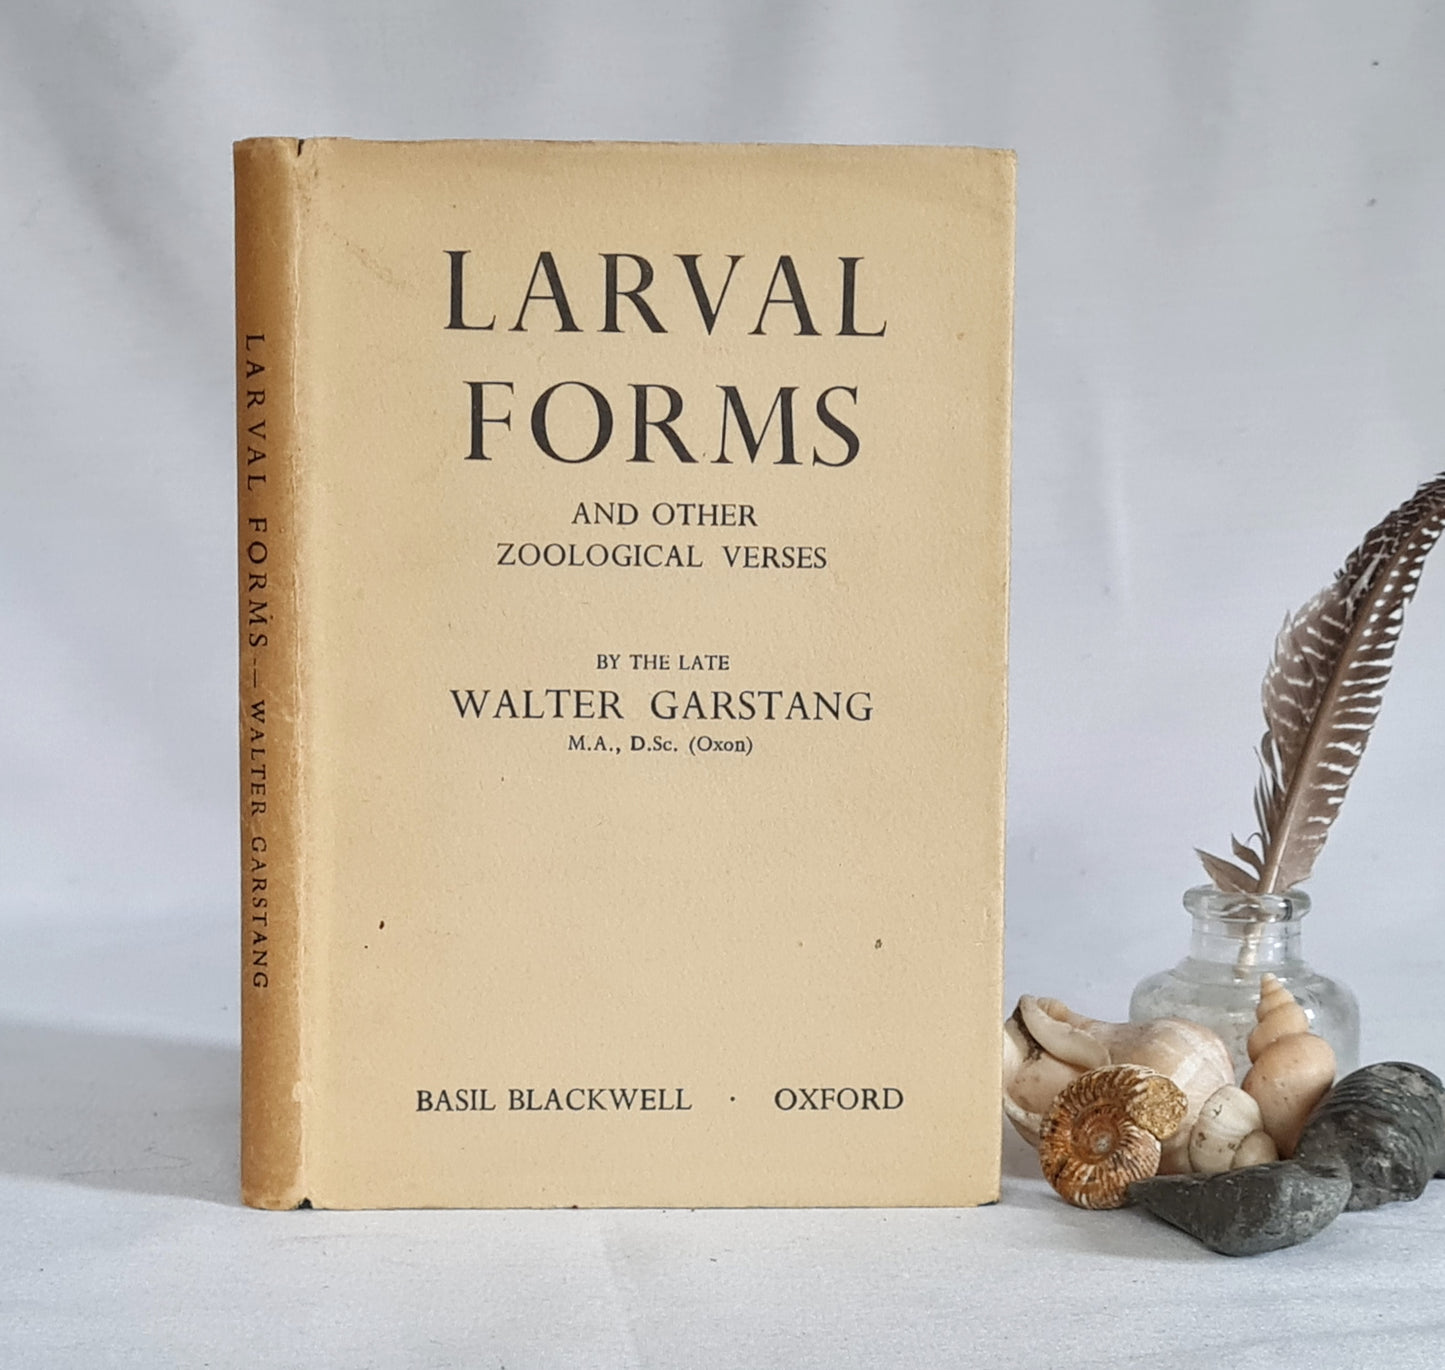 1954 Larval Form and Other Zoological Verse by Walter Garstang / Basil Blackwell, Oxford / In Very Good Condition